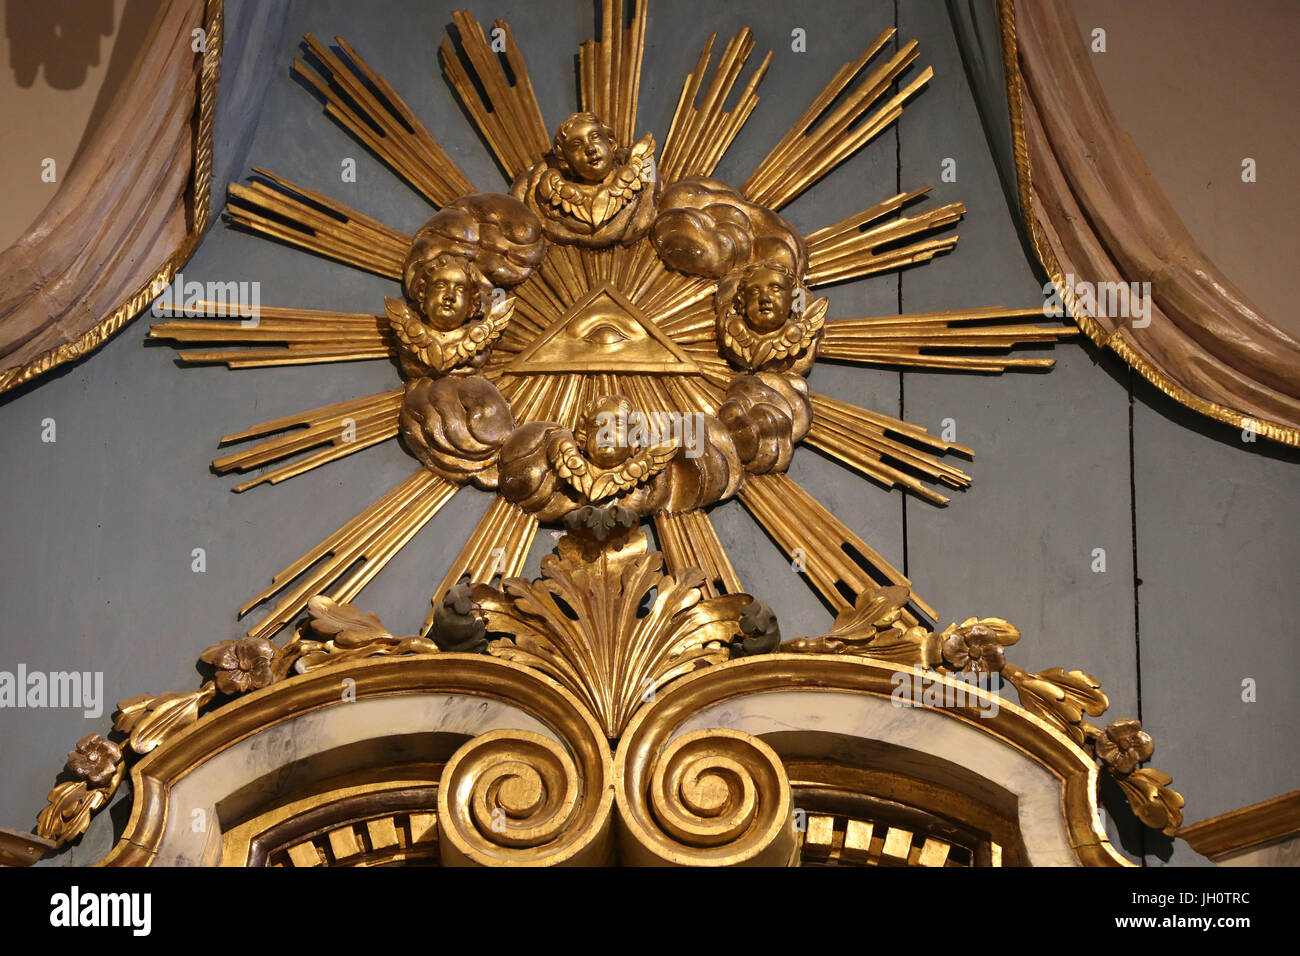 Restoration of Saint Gervais baroque church. The Eye of Providence or the all-seeing eye of God. France. Stock Photo